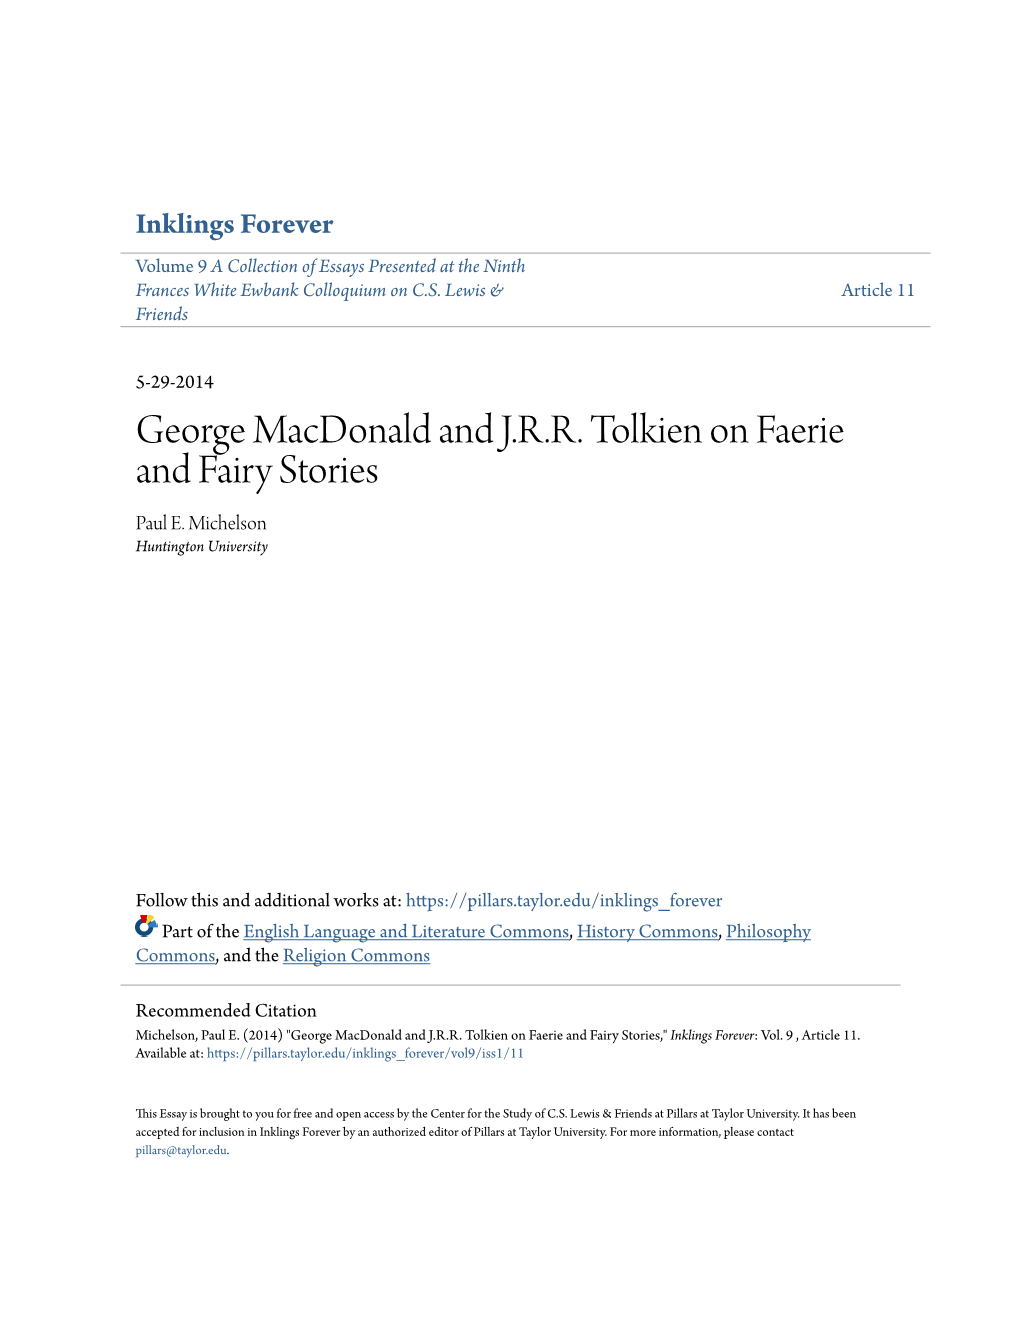 George Macdonald and J.R.R. Tolkien on Faerie and Fairy Stories Paul E